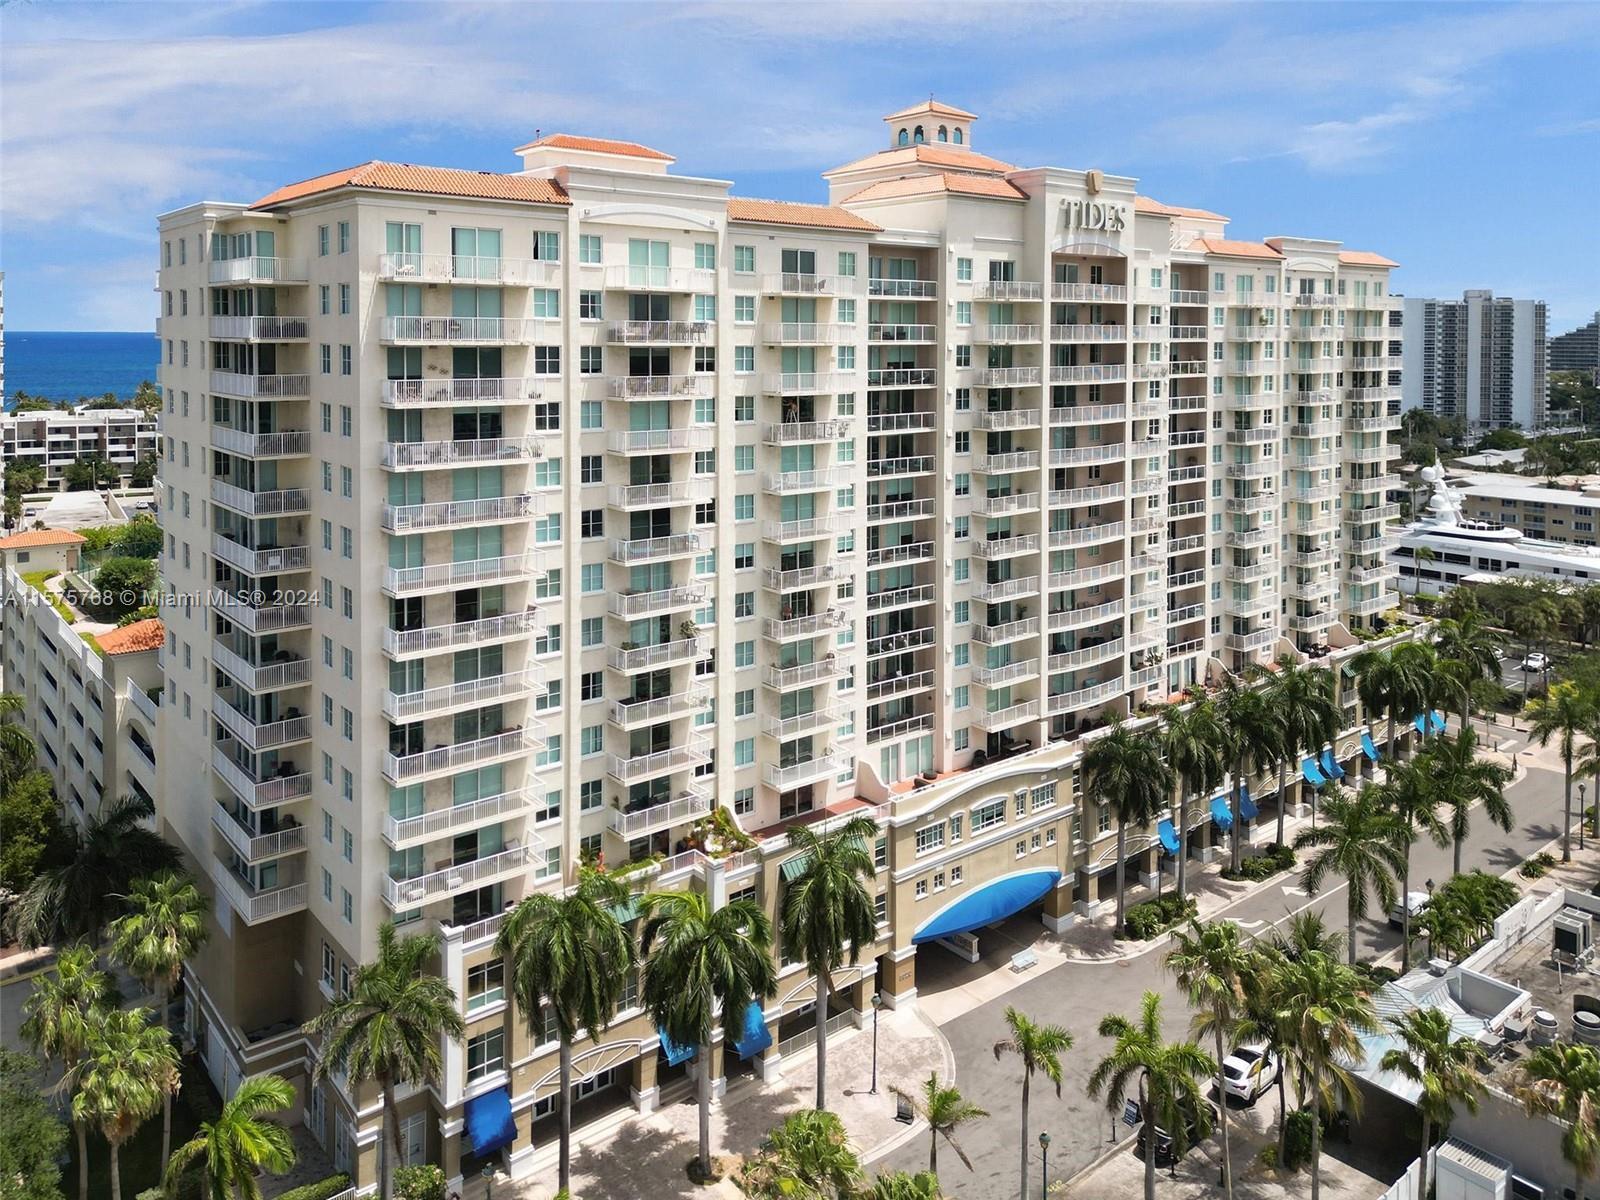 THE MOST DESIRABLE LOCATION IN THE TIDES!!! SE Corner unit with gorgeous views of the ocean, intraco